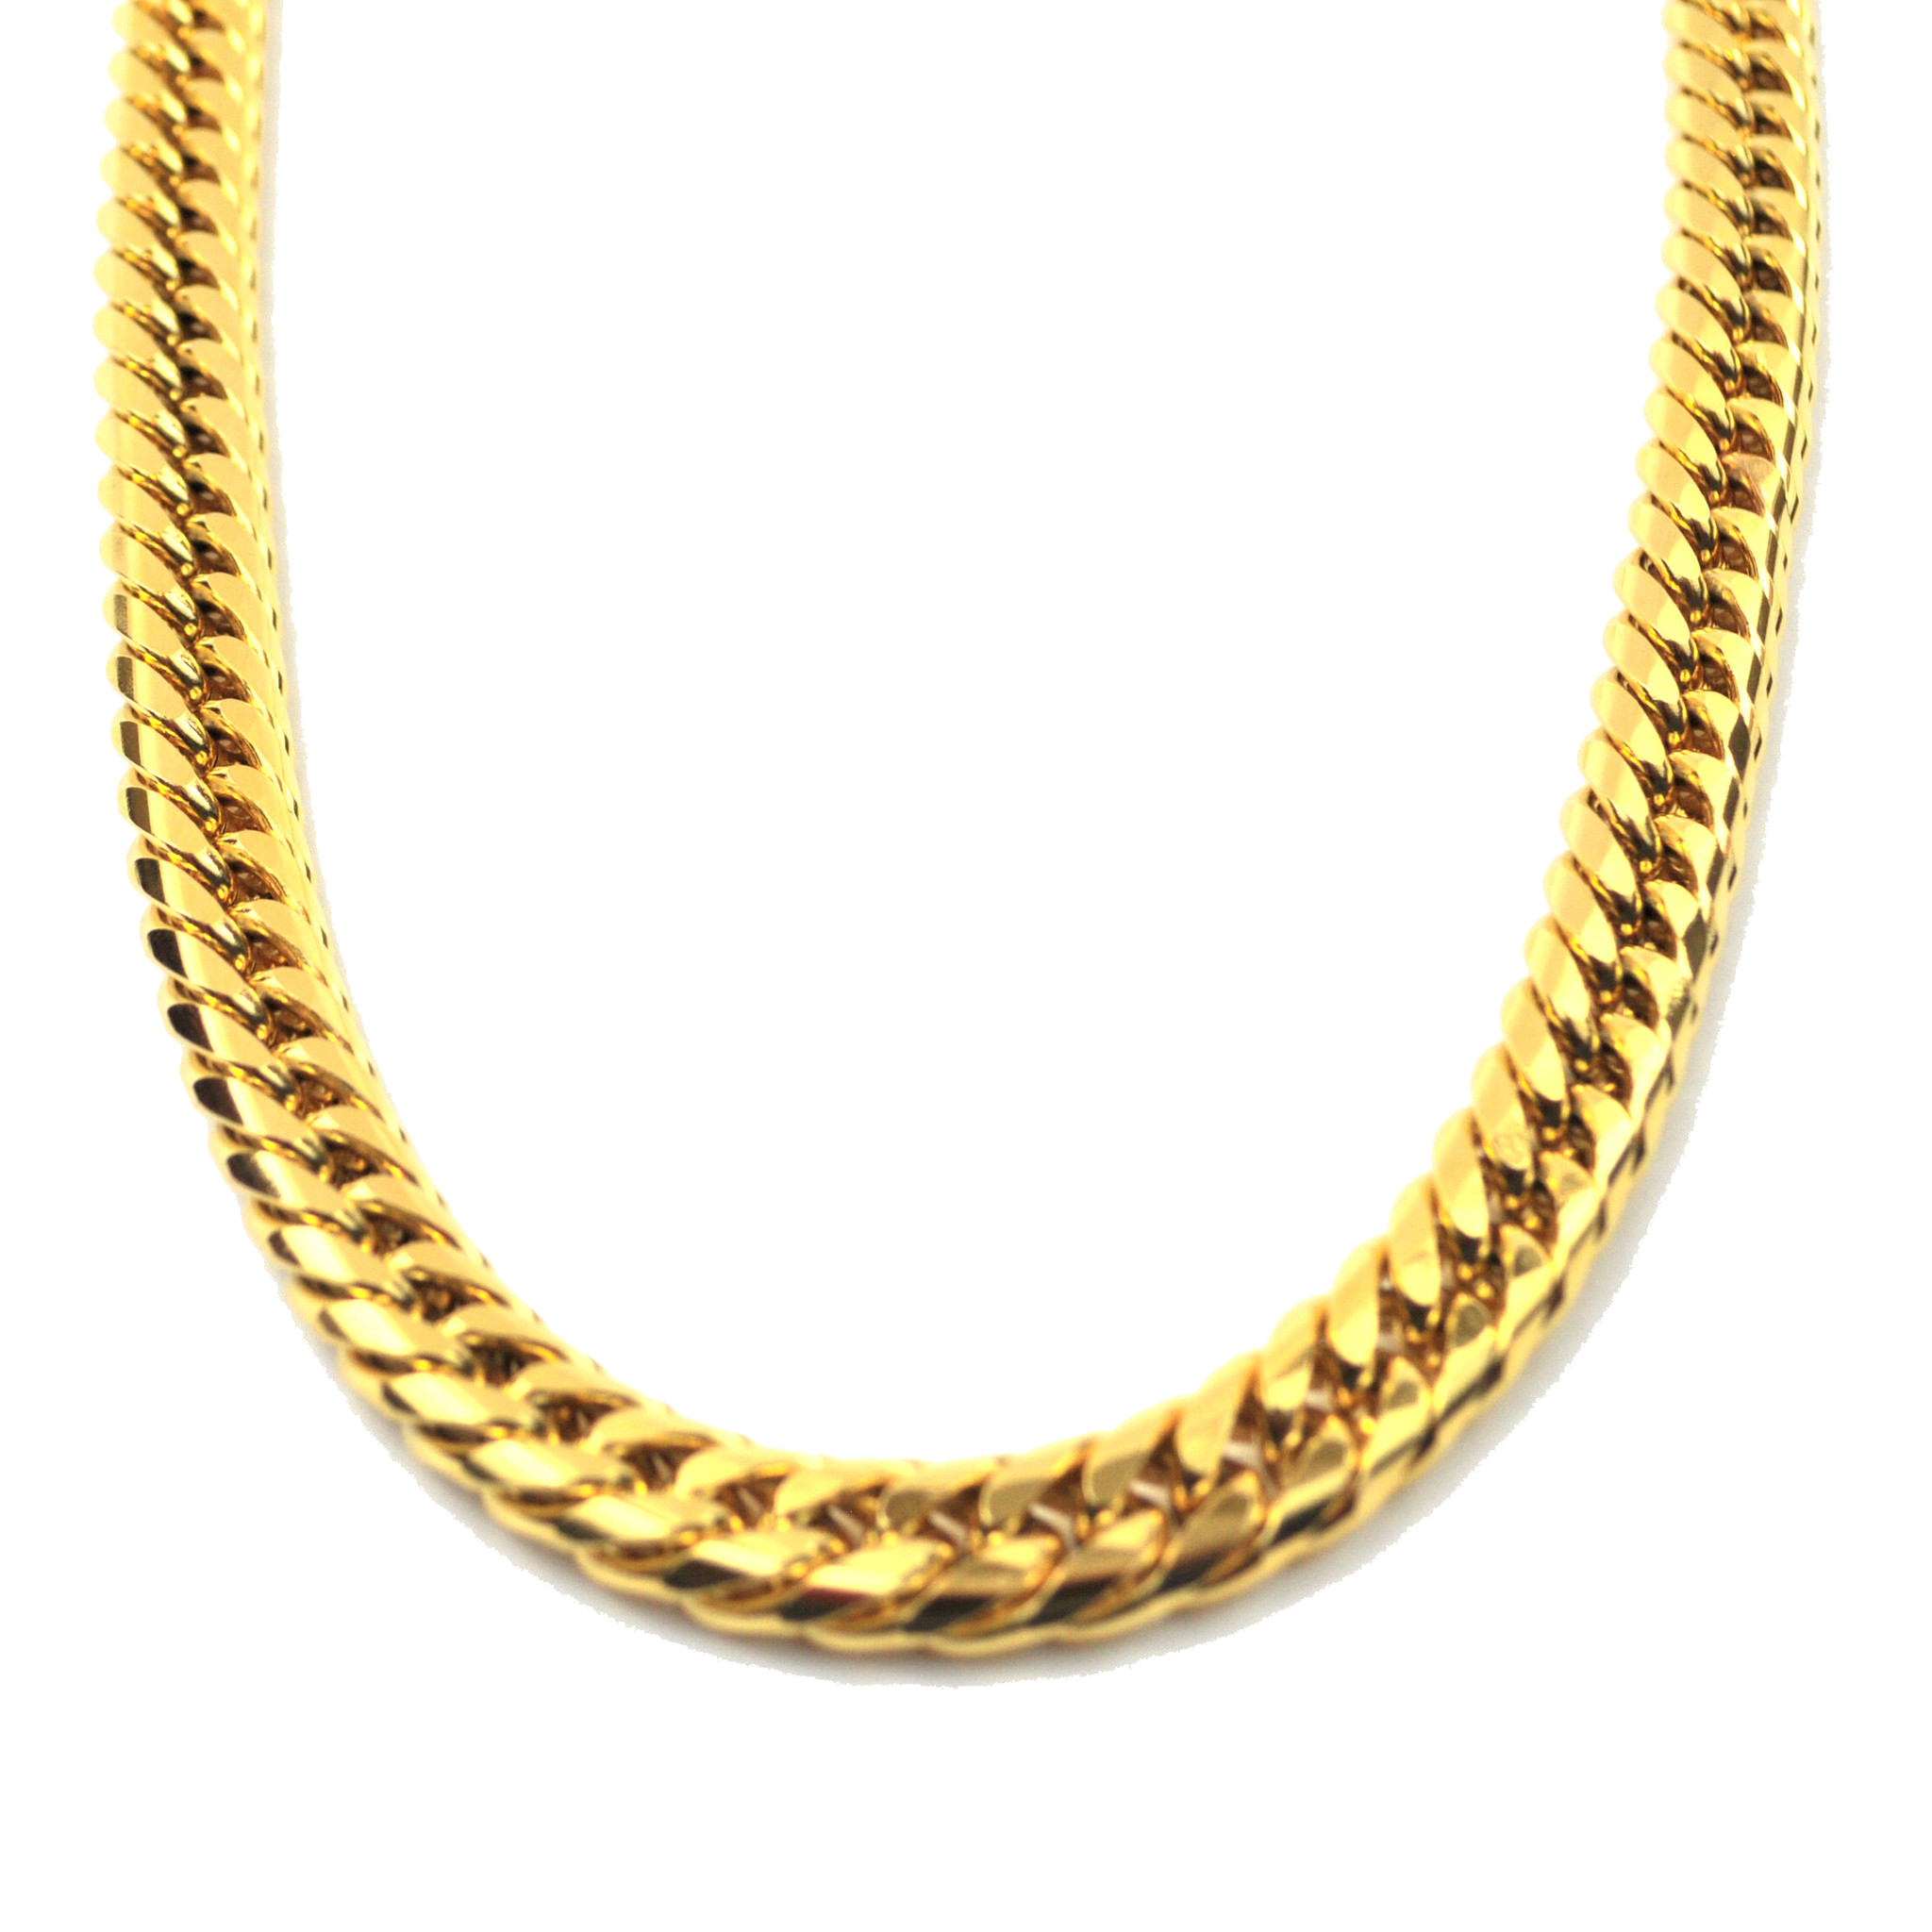 Jewellery Chain Clipart PNG Image